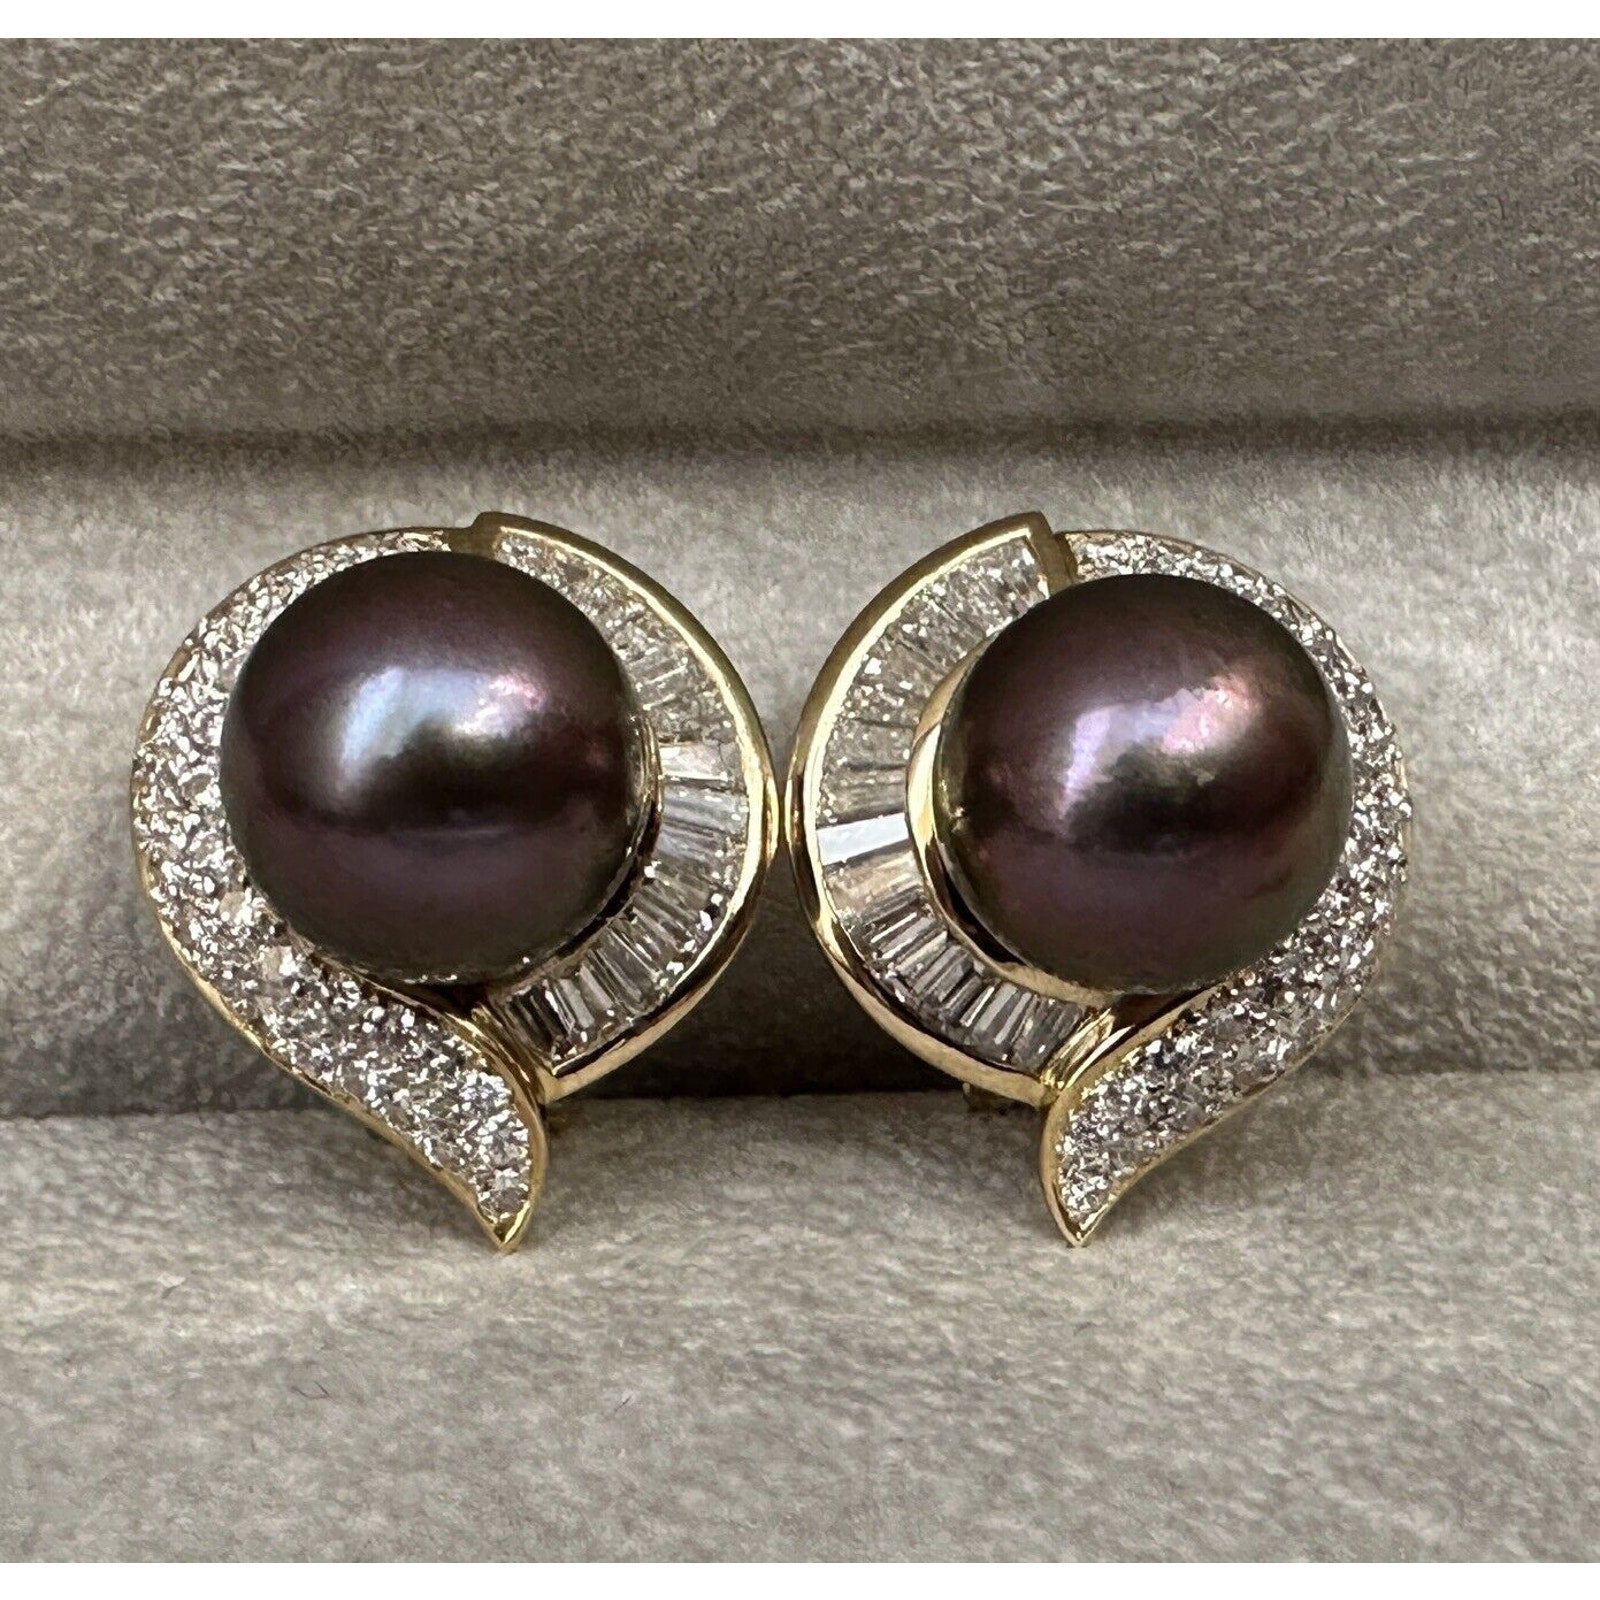 Black South Sea Pearl and Diamond Earrings in 18k Yellow Gold-HM2564AN